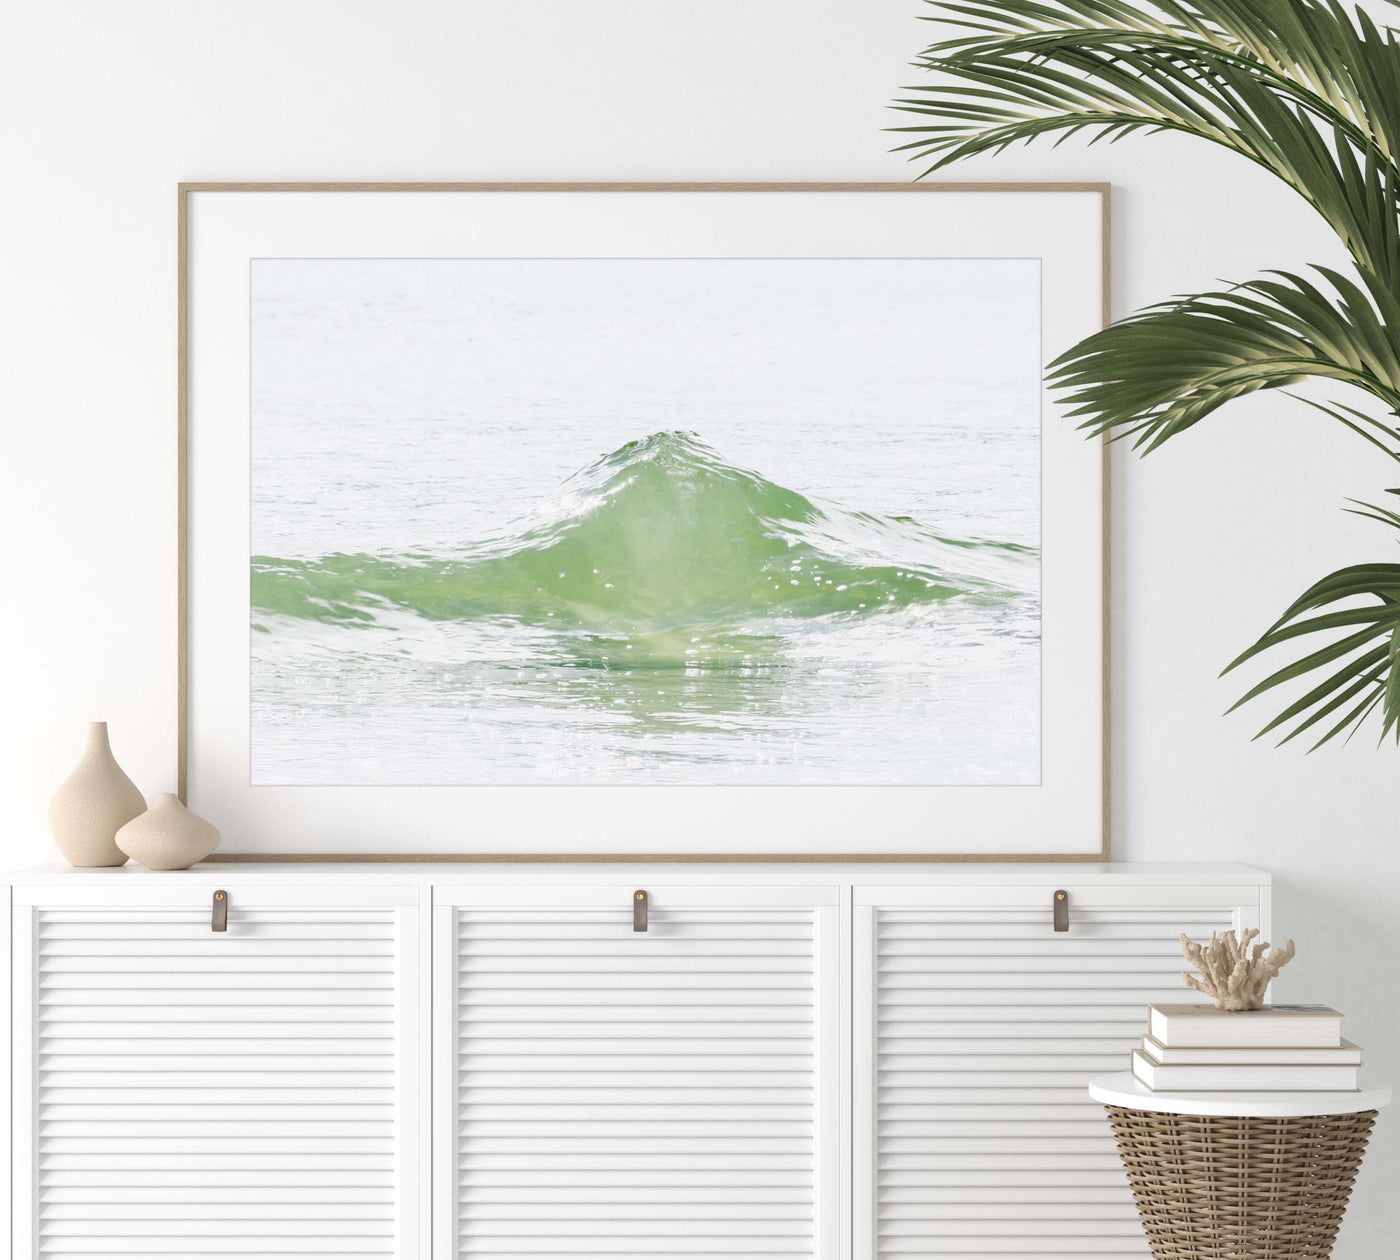 Ocean Waves No 1 - Framed ocean print by Cattie Coyle Photography on white dresser